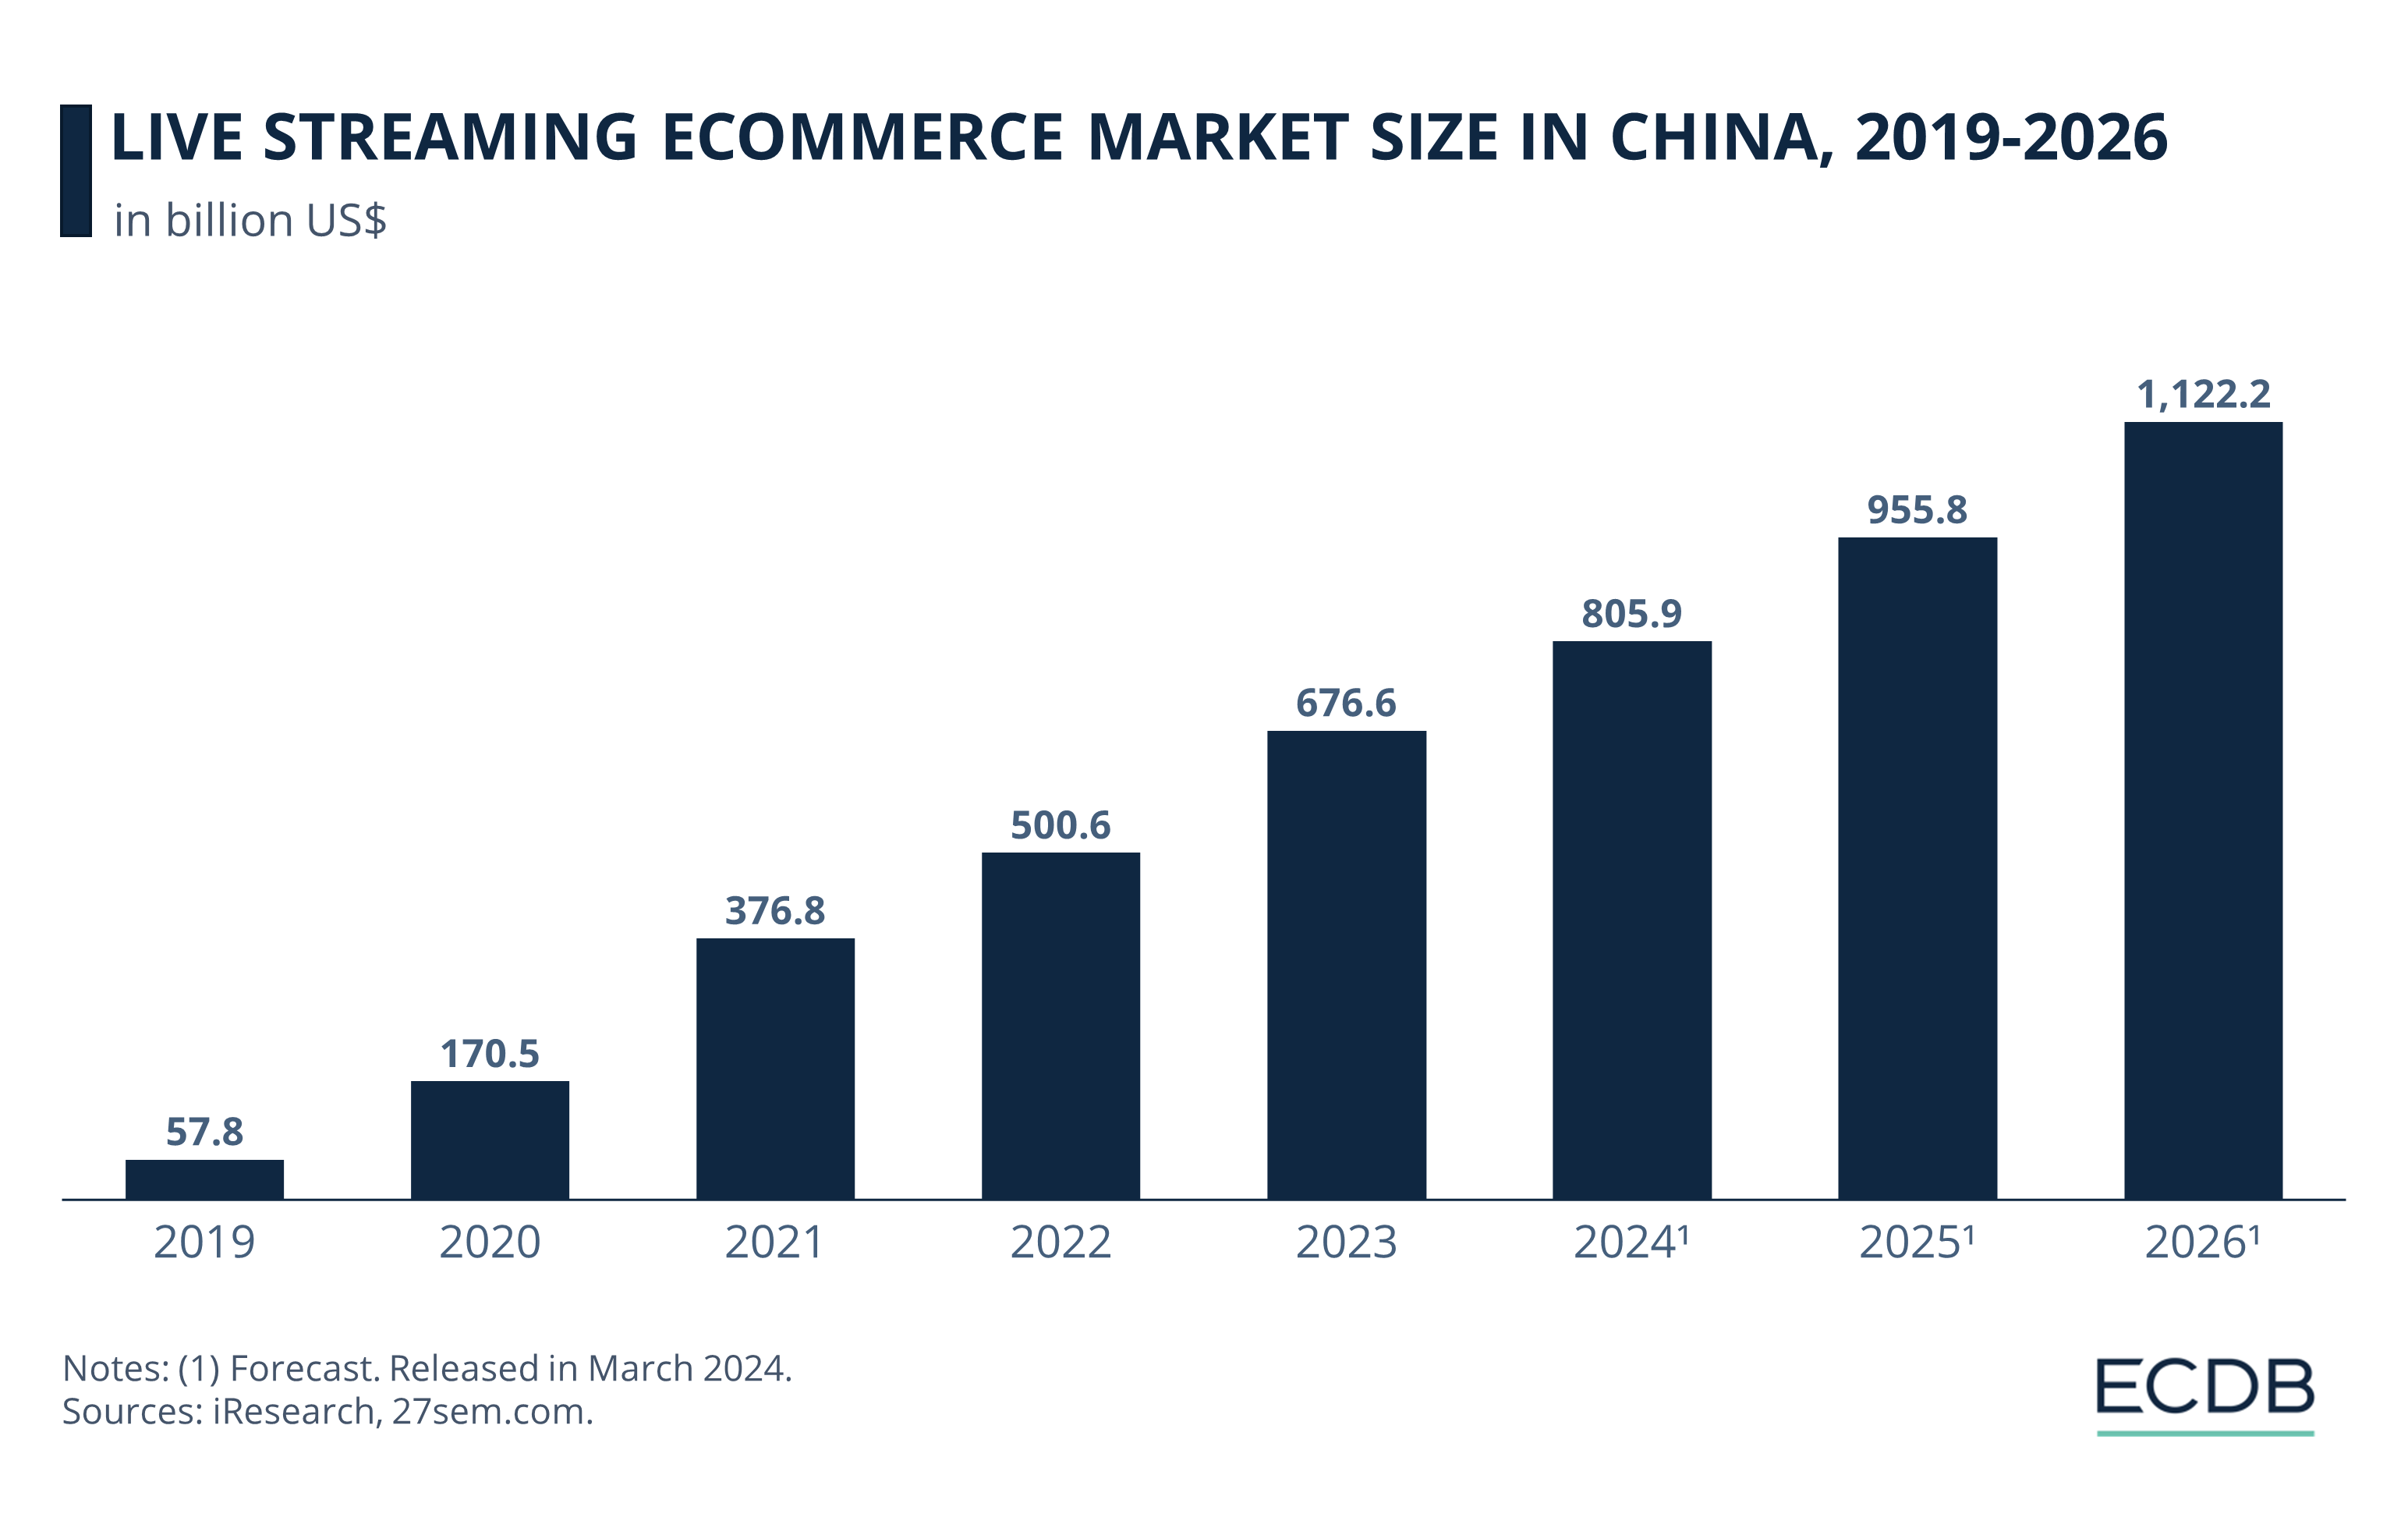 Live Streaming eCommerce Market Size in China, 2019-2026